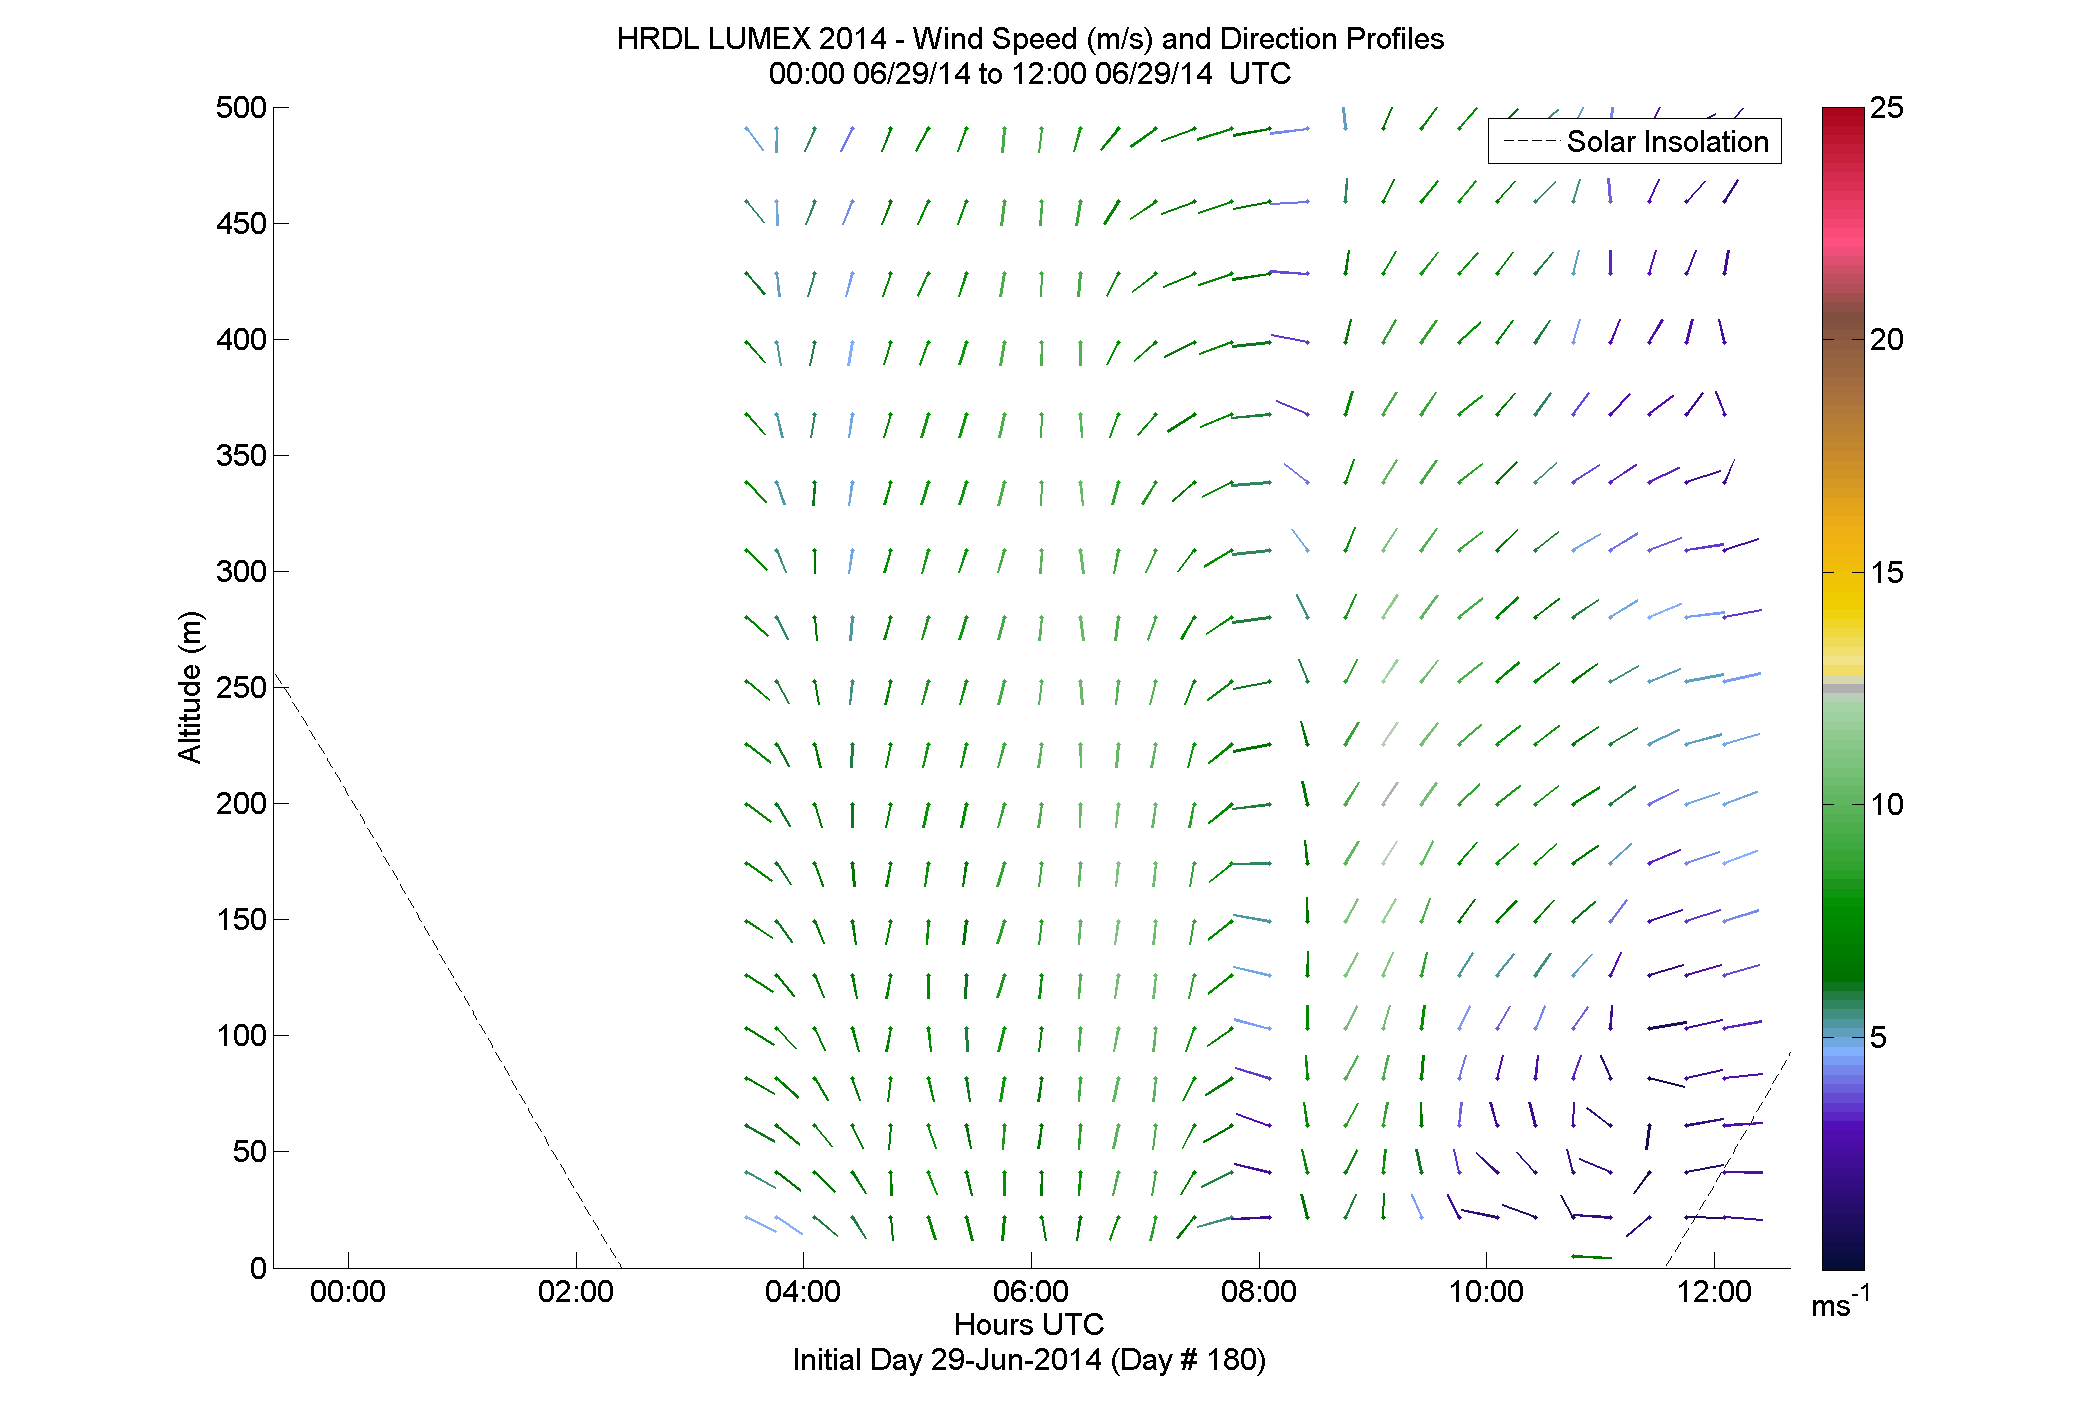 HRDL speed and direction profile - June 29 am